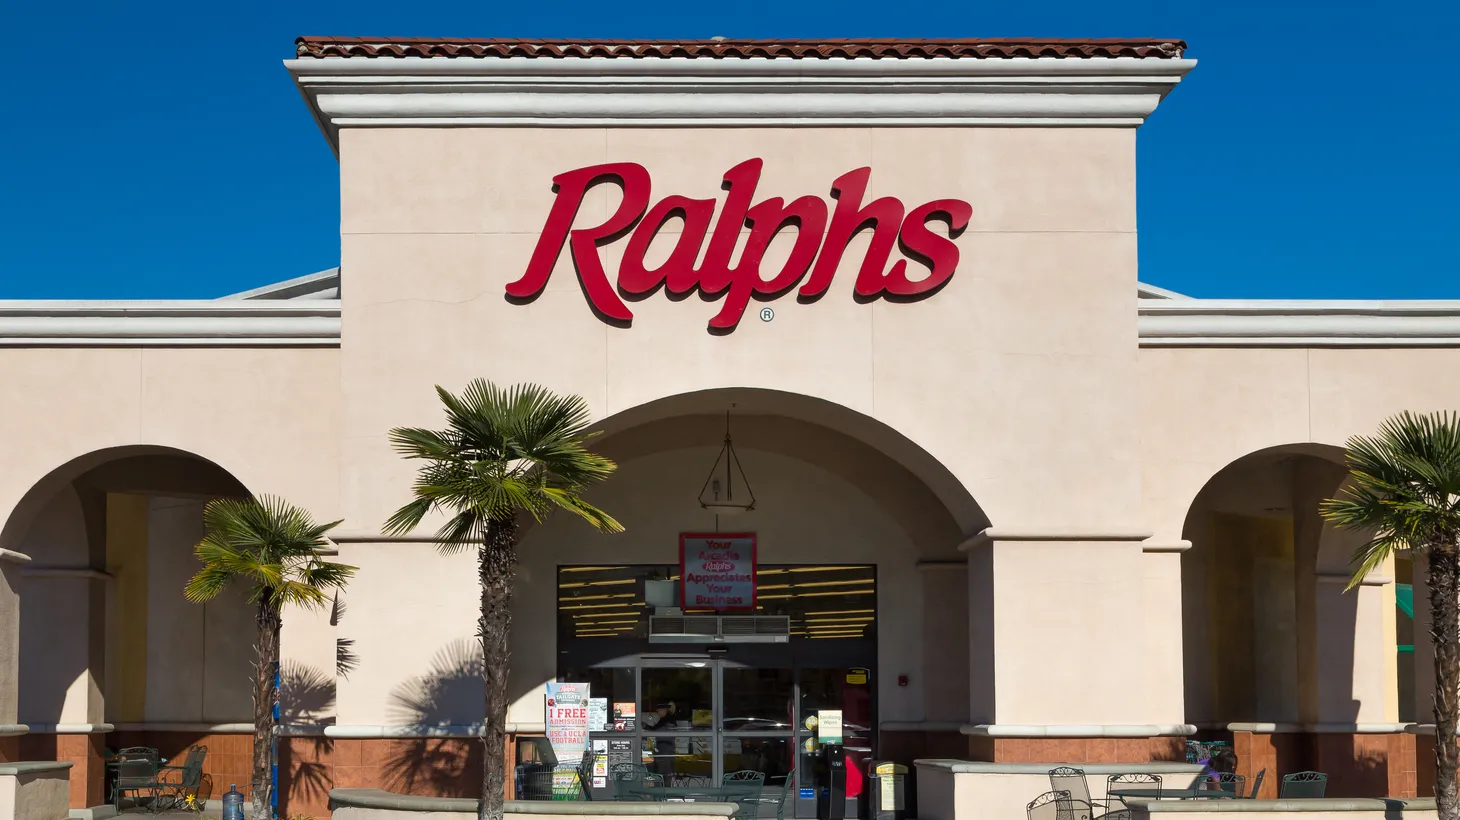 Workers at Ralphs and Food 4 Less, which are subsidiaries of the Kroger Company, report feeling underpaid, overworked, and underappreciated. The sentiments are in line with the findings of a new report from Economic Roundtable.